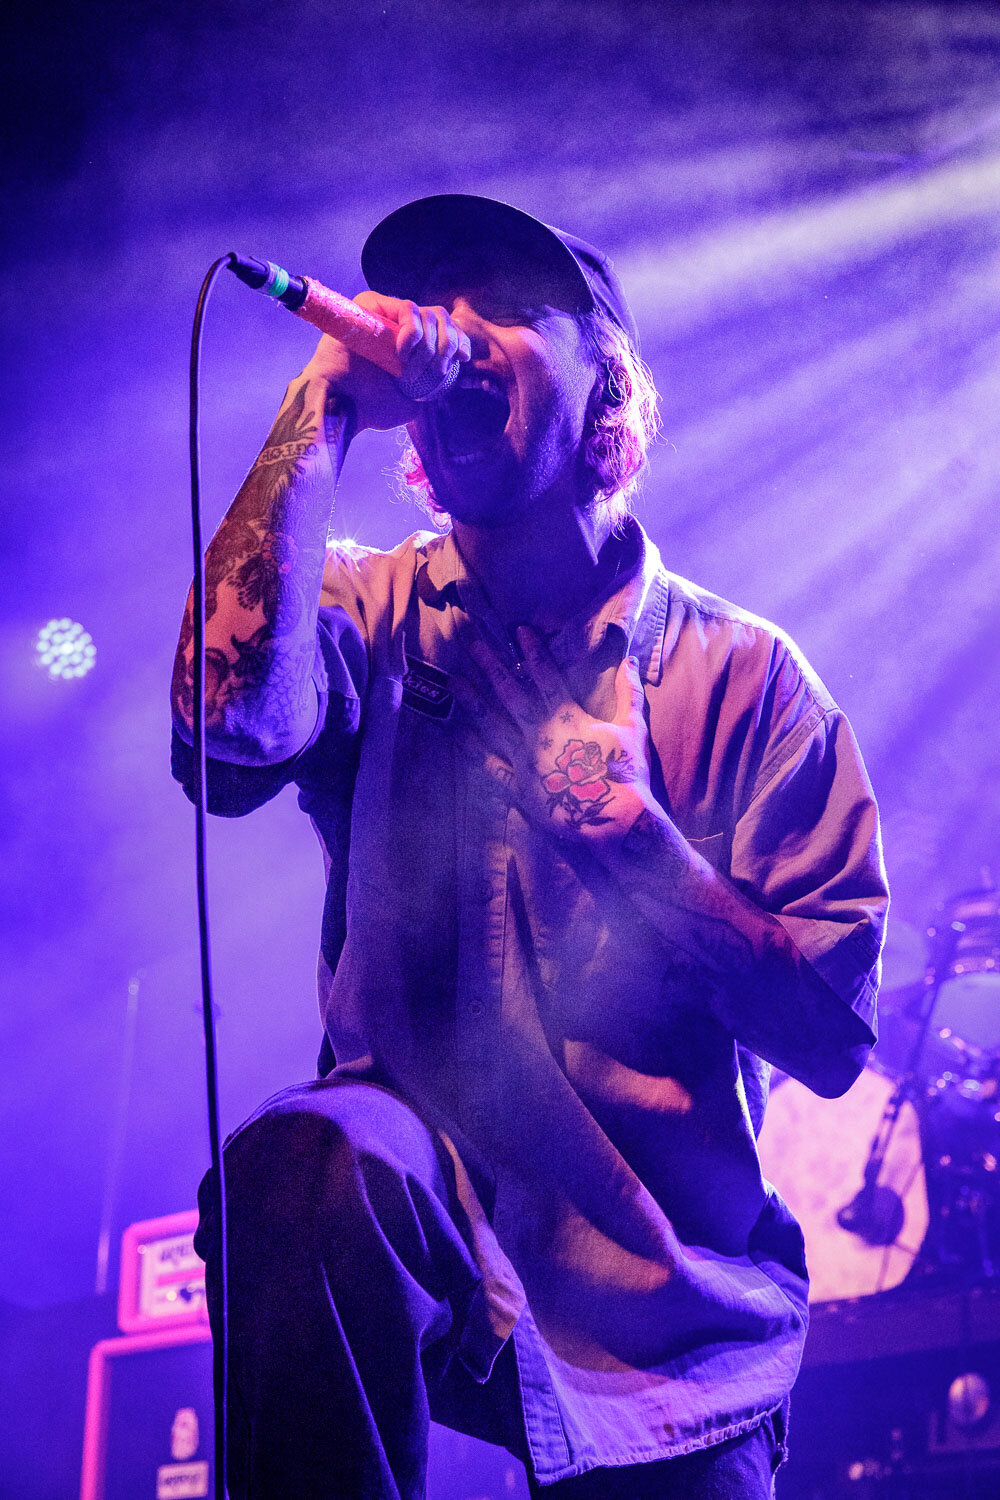 Higher Power at the Manchester Academy on February 28th 2020